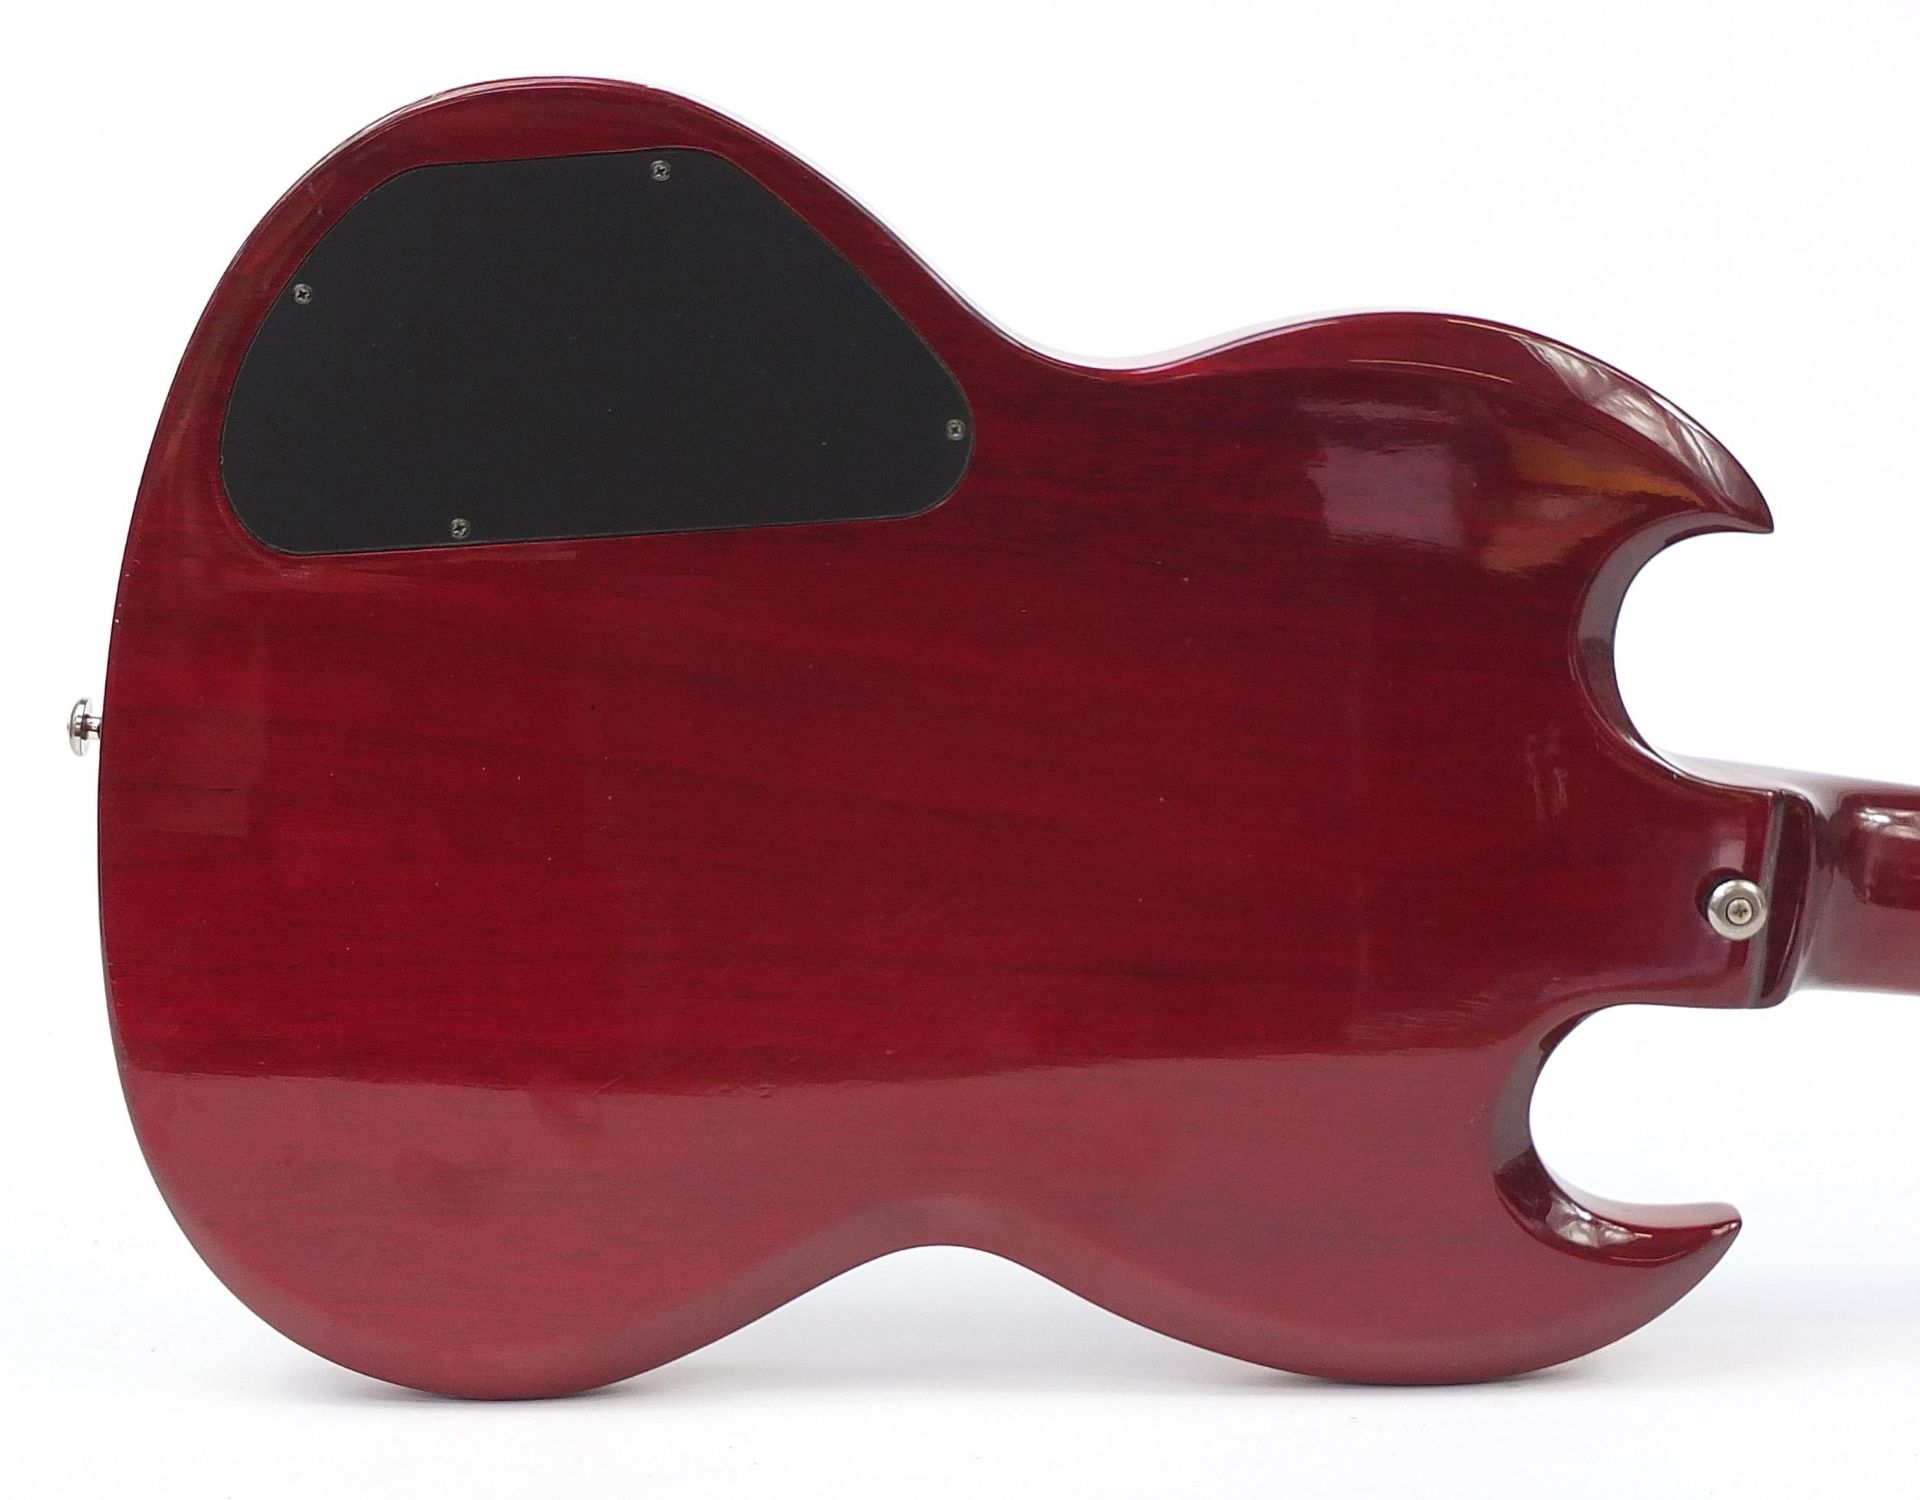 Red lacquered Gibson Epiphone six string electric guitar, serial number S01015681, 100cm in length - Image 7 of 9